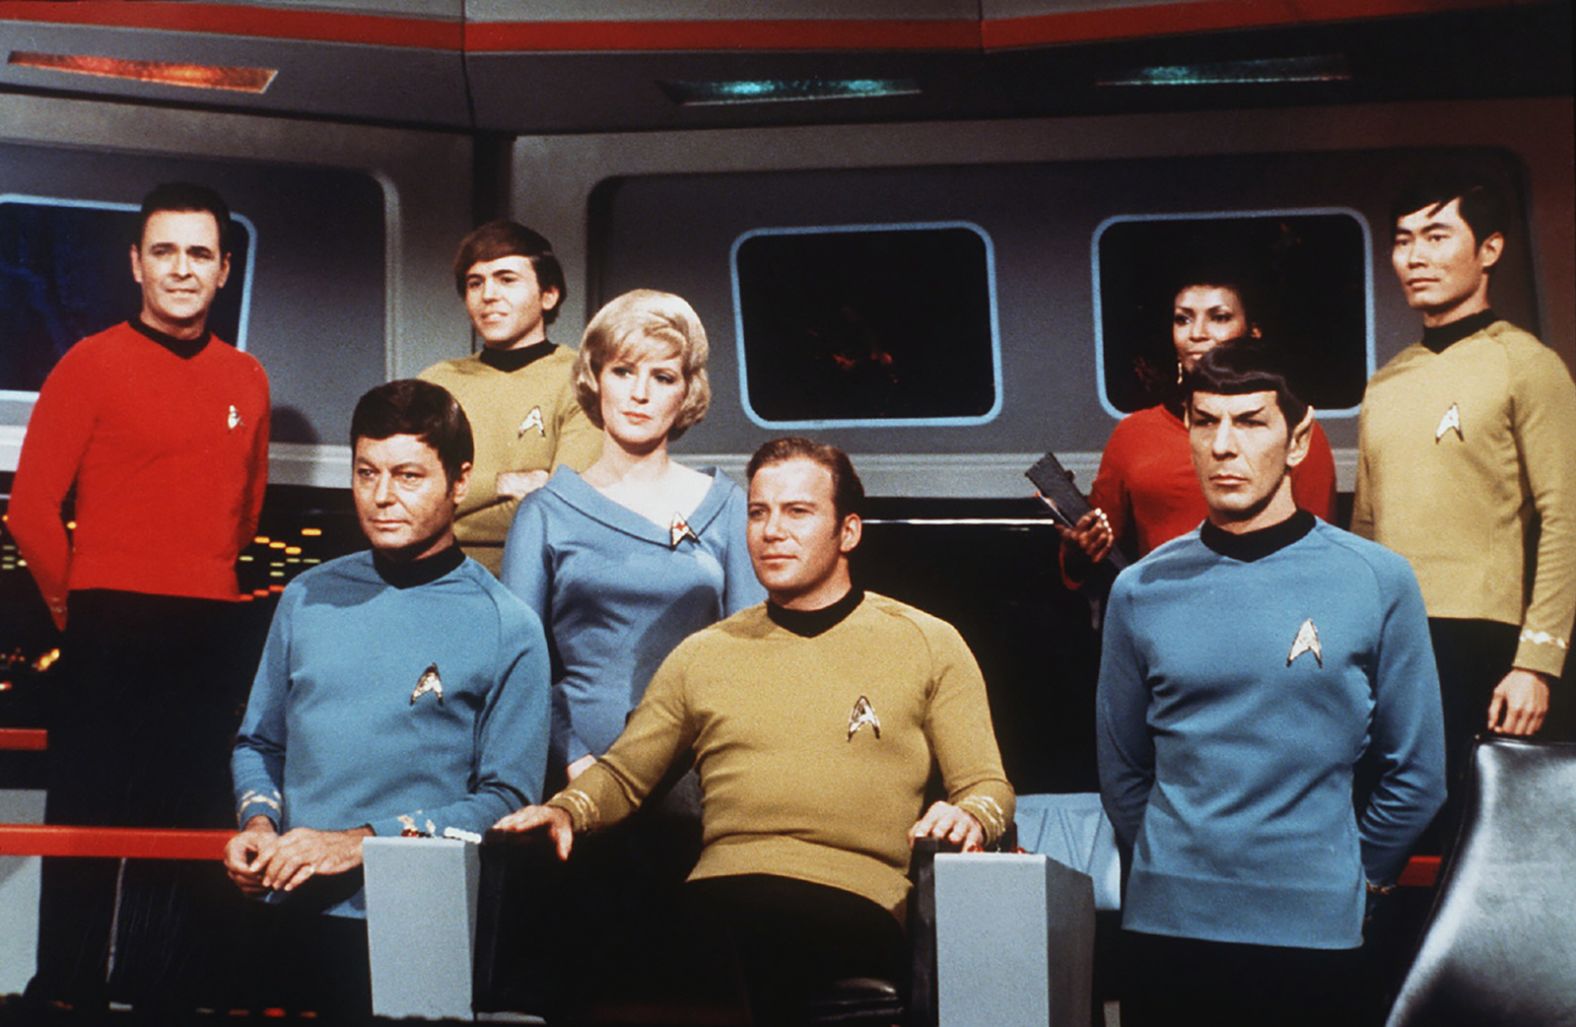 Shatner appears with castmates on the set of the TV show "Star Trek" in 1966.